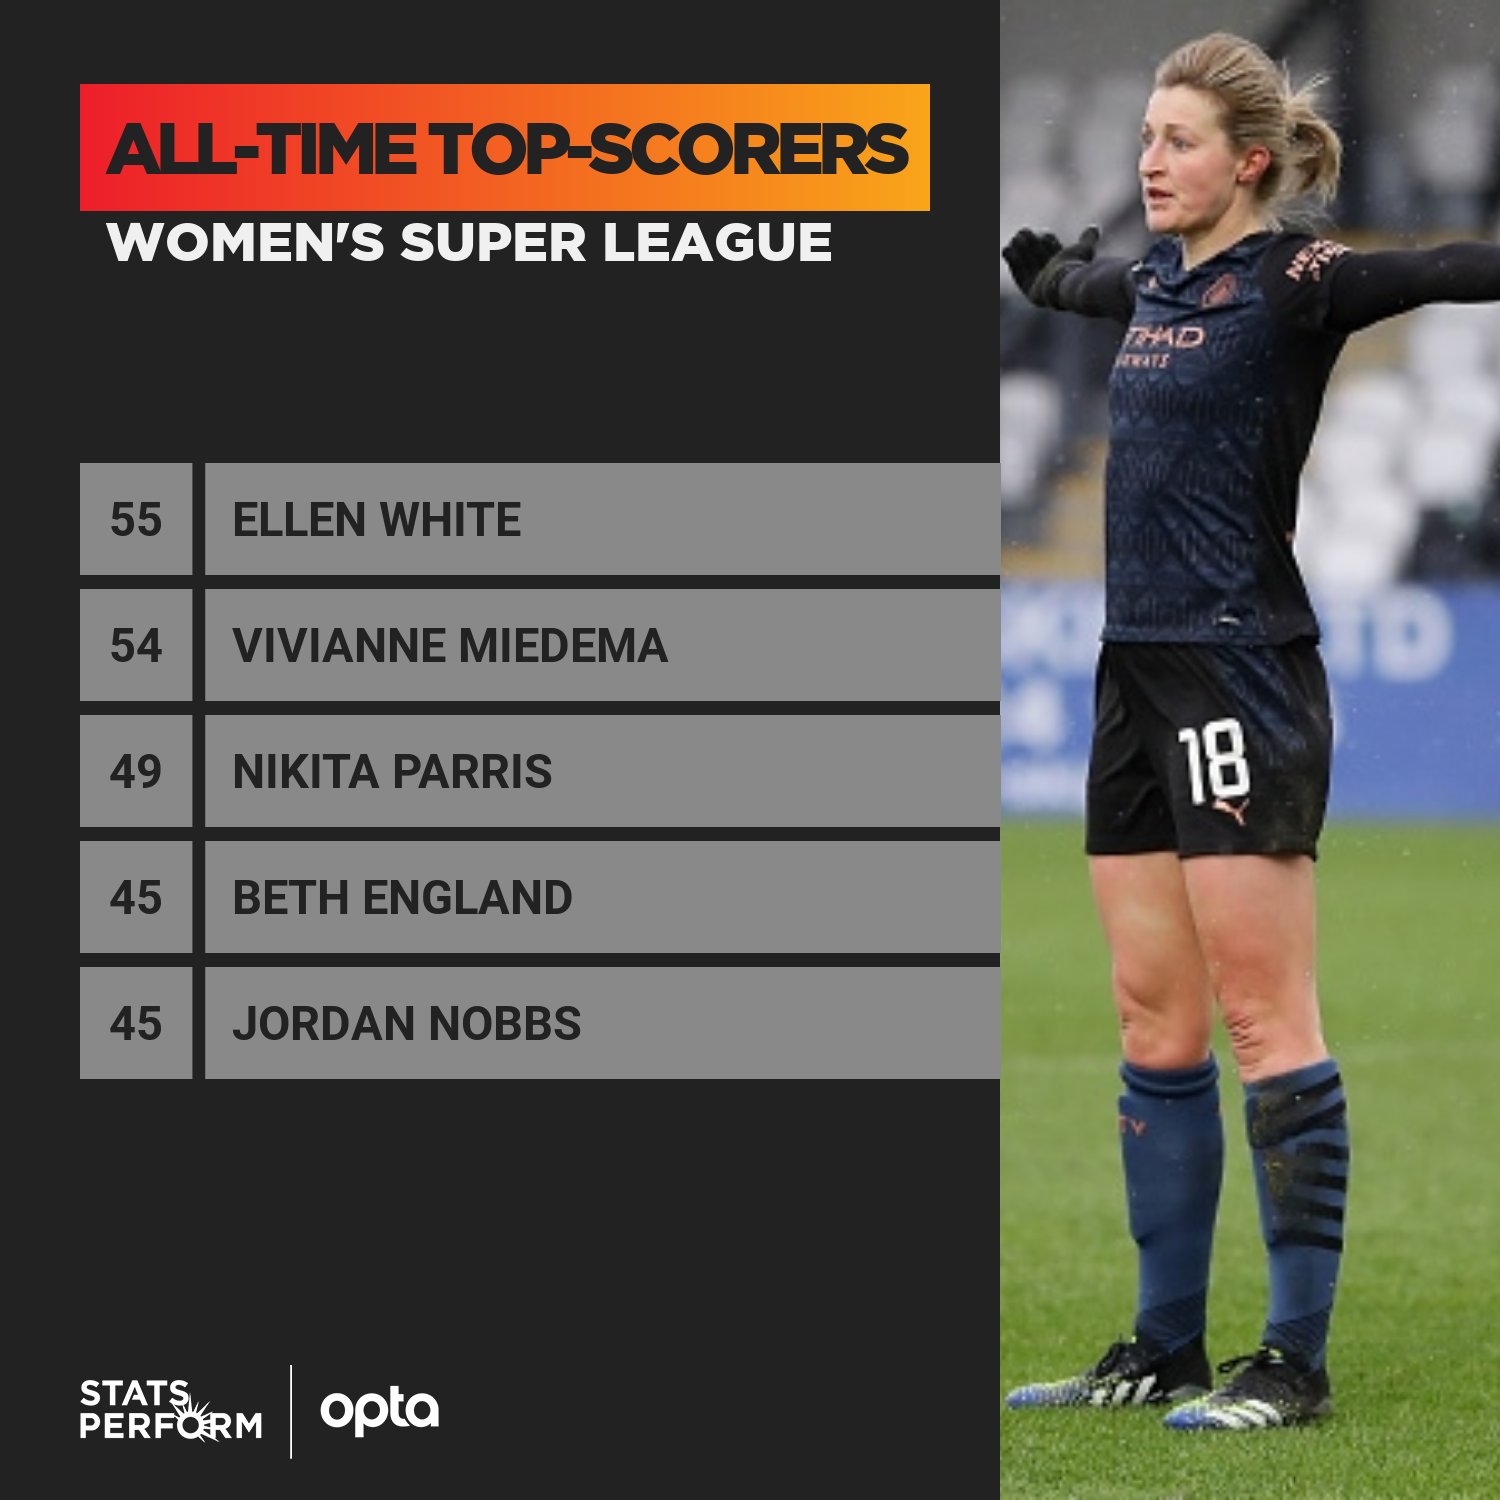 Regnfuld transportabel Nordamerika OptaJoe on Twitter: "55 – Following her goal for Manchester City against  Arsenal on Sunday, Ellen White became the outright all-time top-scorer in  the history of the Women's Super League. Legendary.  https://t.co/7rP4hwUs7p" /